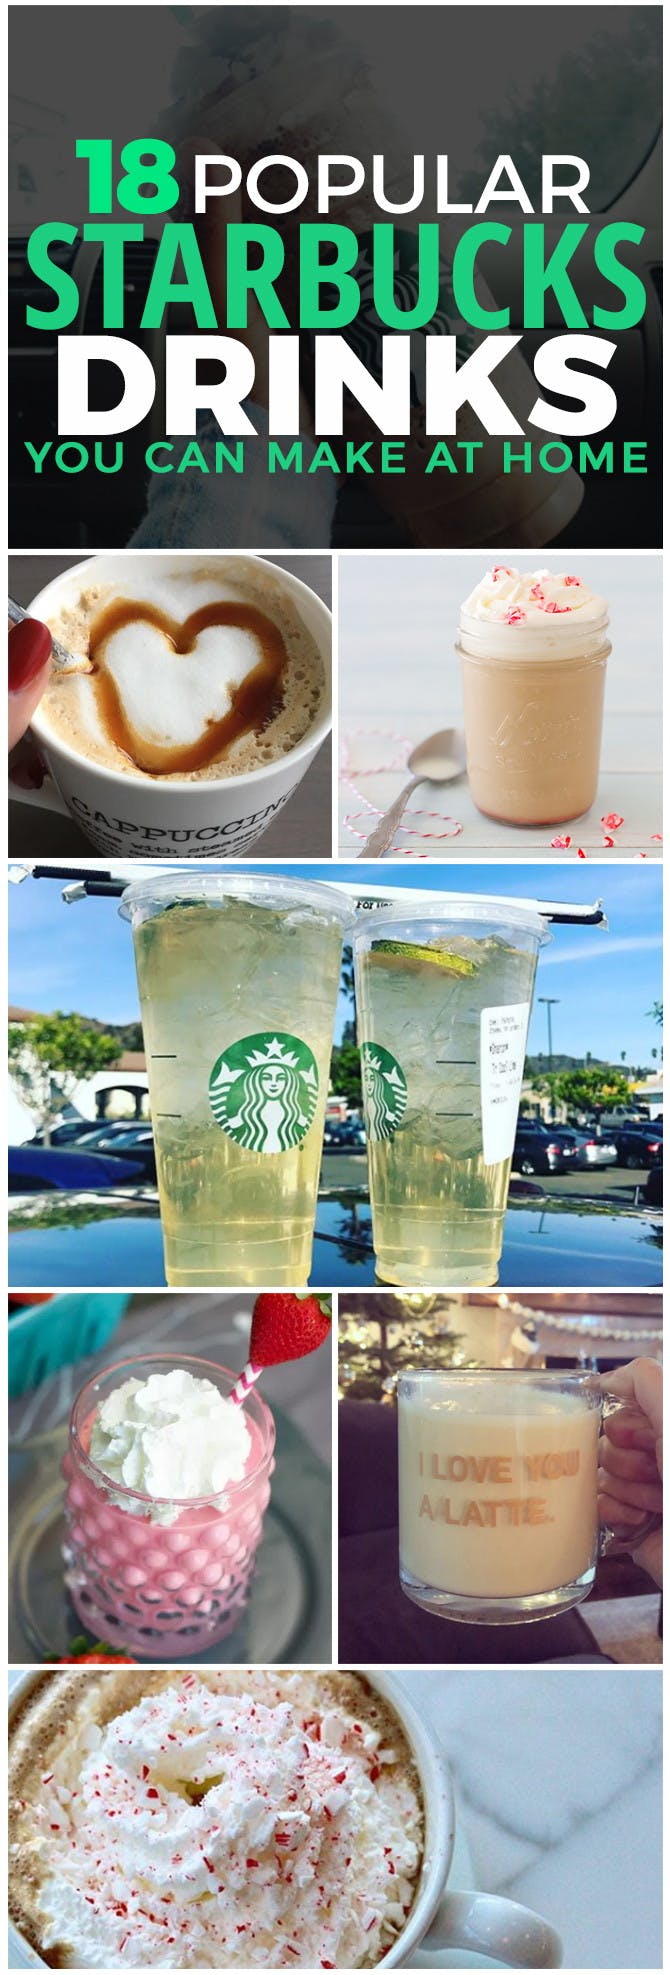 18 Most Popular Starbucks Drinks You Can Make at Home